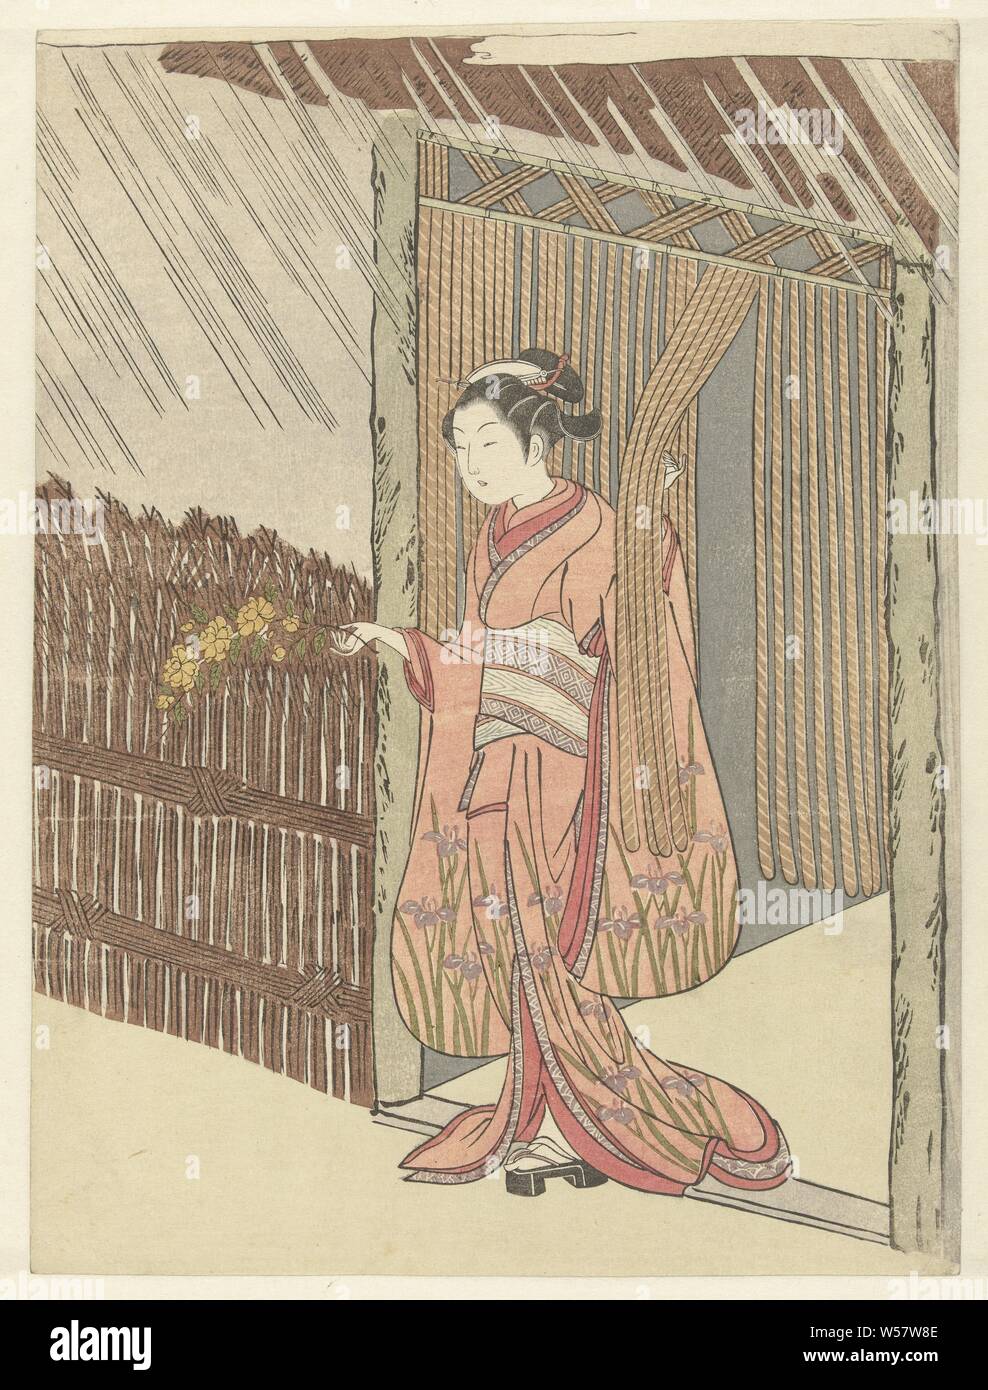 Girl with a yamabuki branch in hands, Girl in pink kimono with iris pattern and in her right hand a branch with yellow flowers, standing in doorway., Suzuki Harunobu, Japan, 1764 - 1768, paper, colour woodcut, h 277 mm × w 207 mm Stock Photo